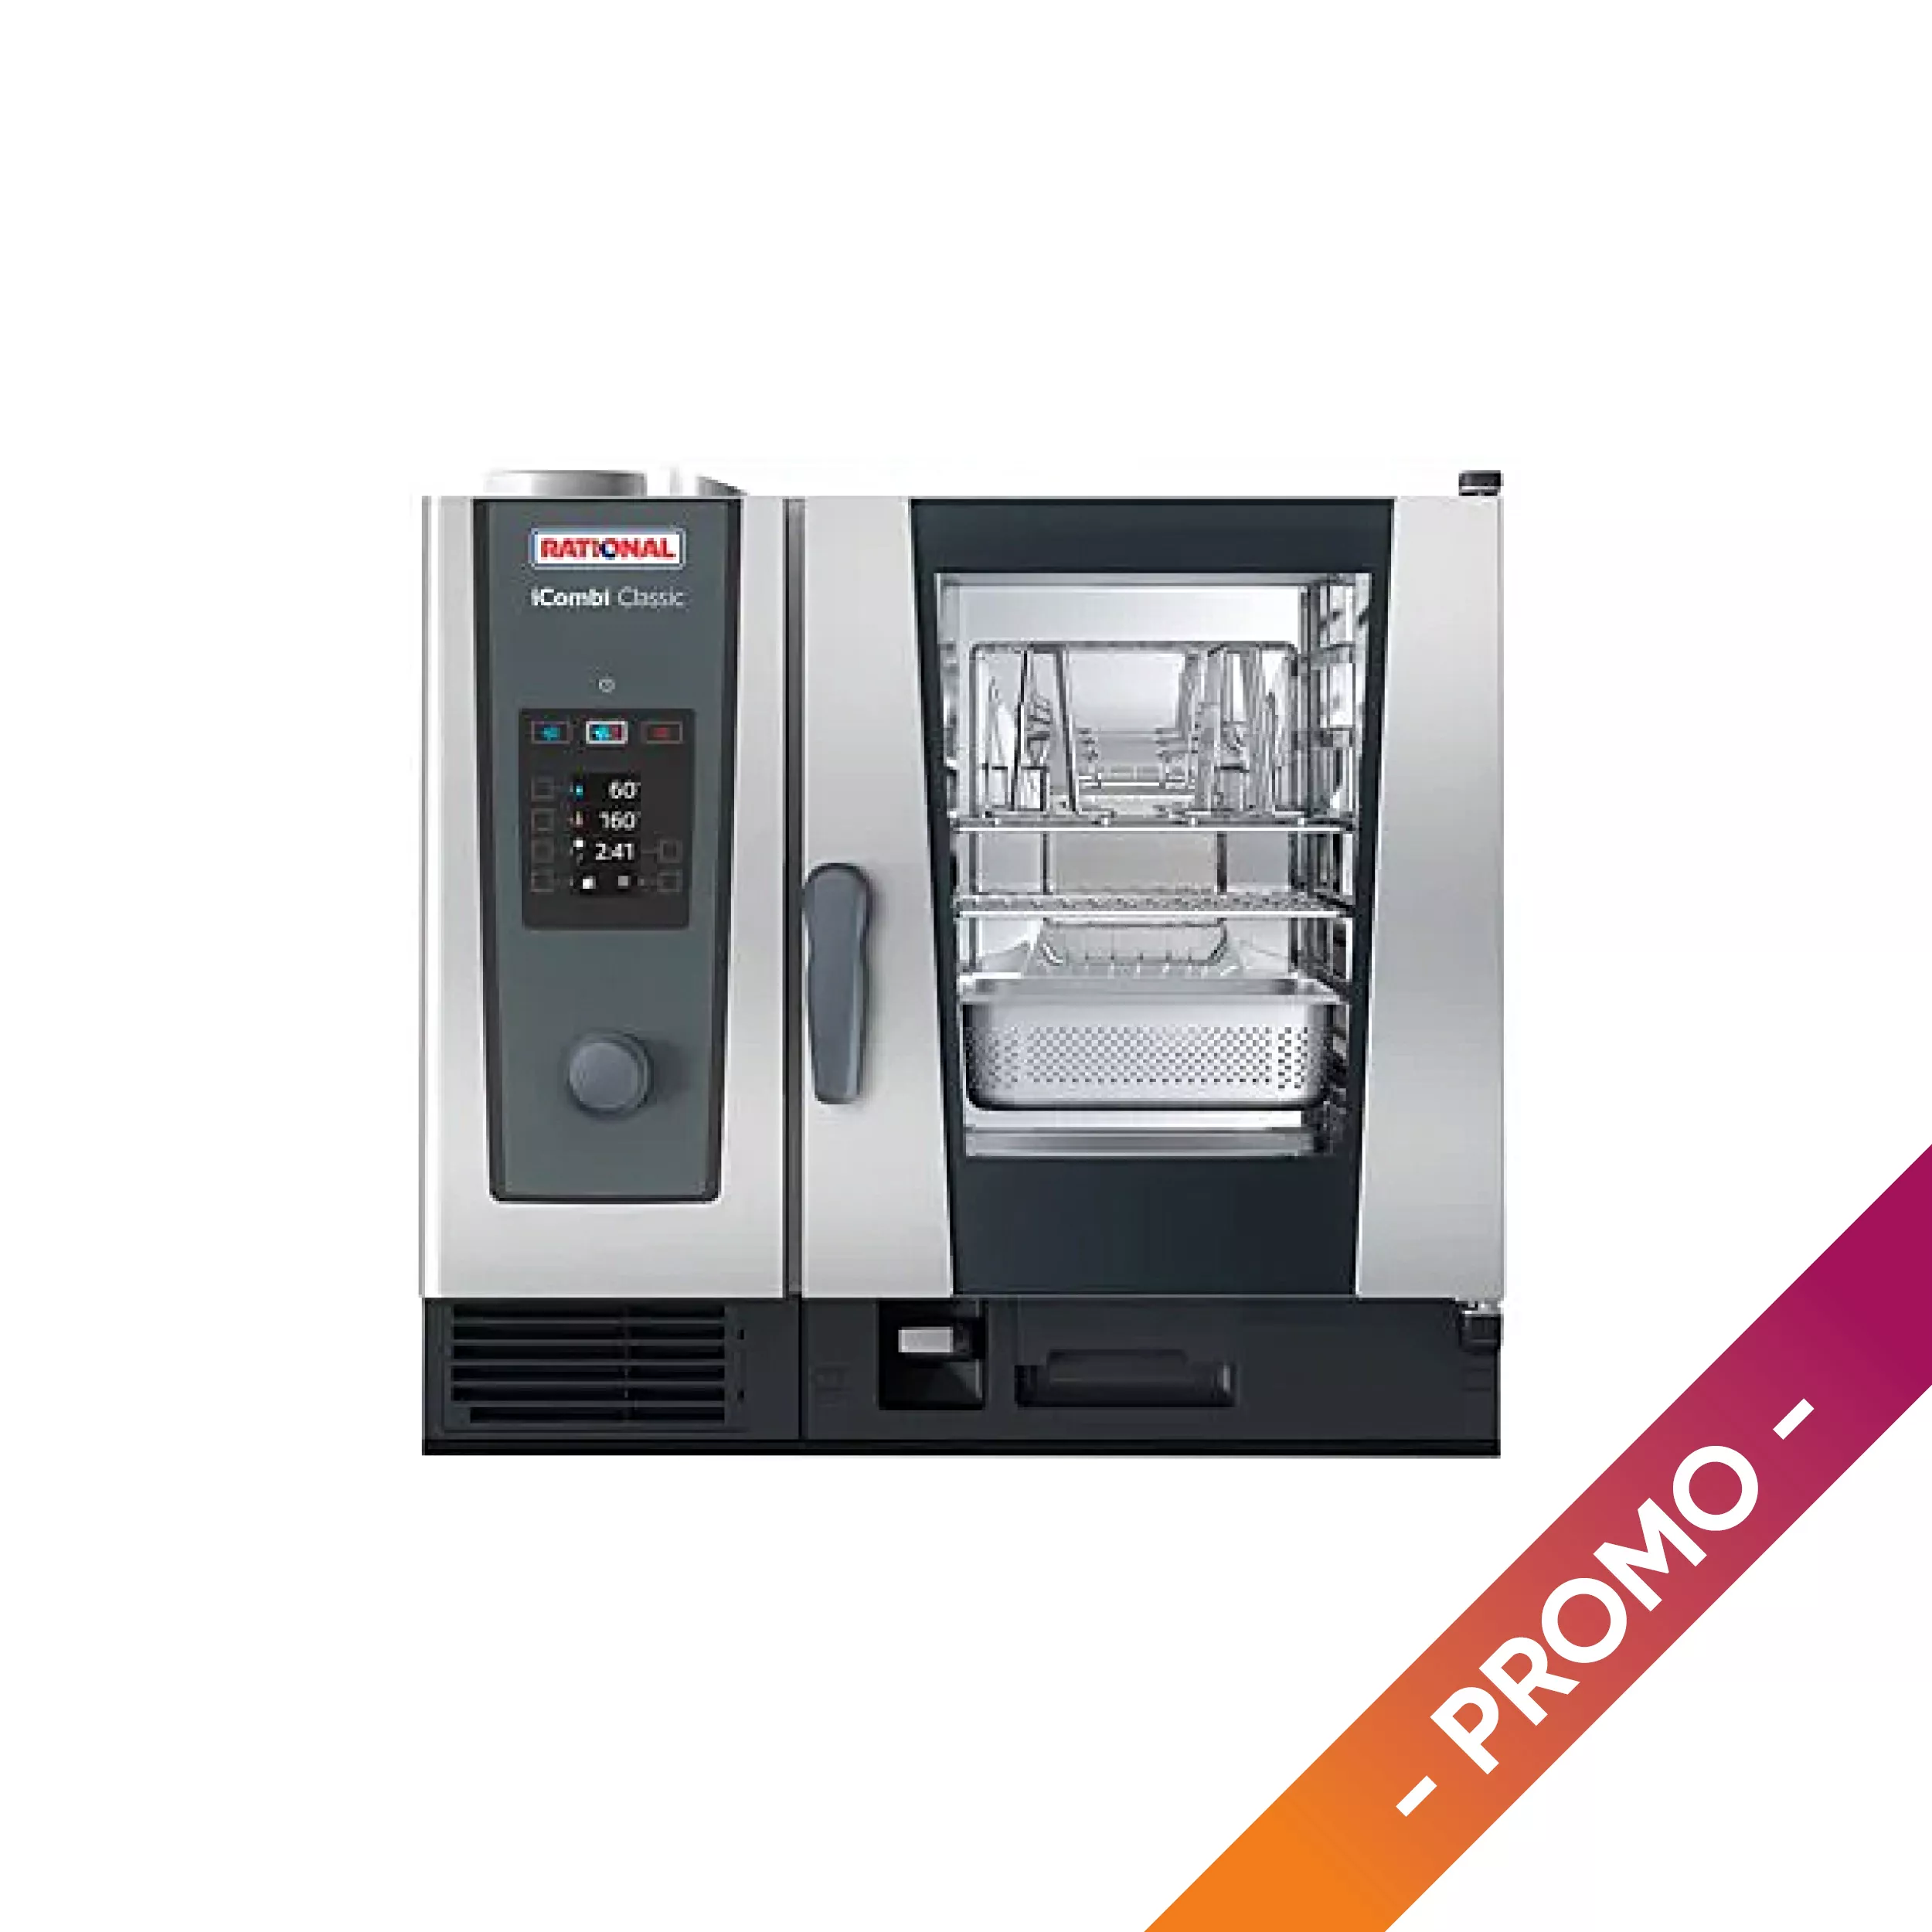 RATIONAL® ICOMBI CLASSIC ELECTRIC OVEN (6 GASTRONORM 1/1 TRAYS) DIM. mm.850x842x754H, THREE-PHASE 400V POT. 10.8KW.